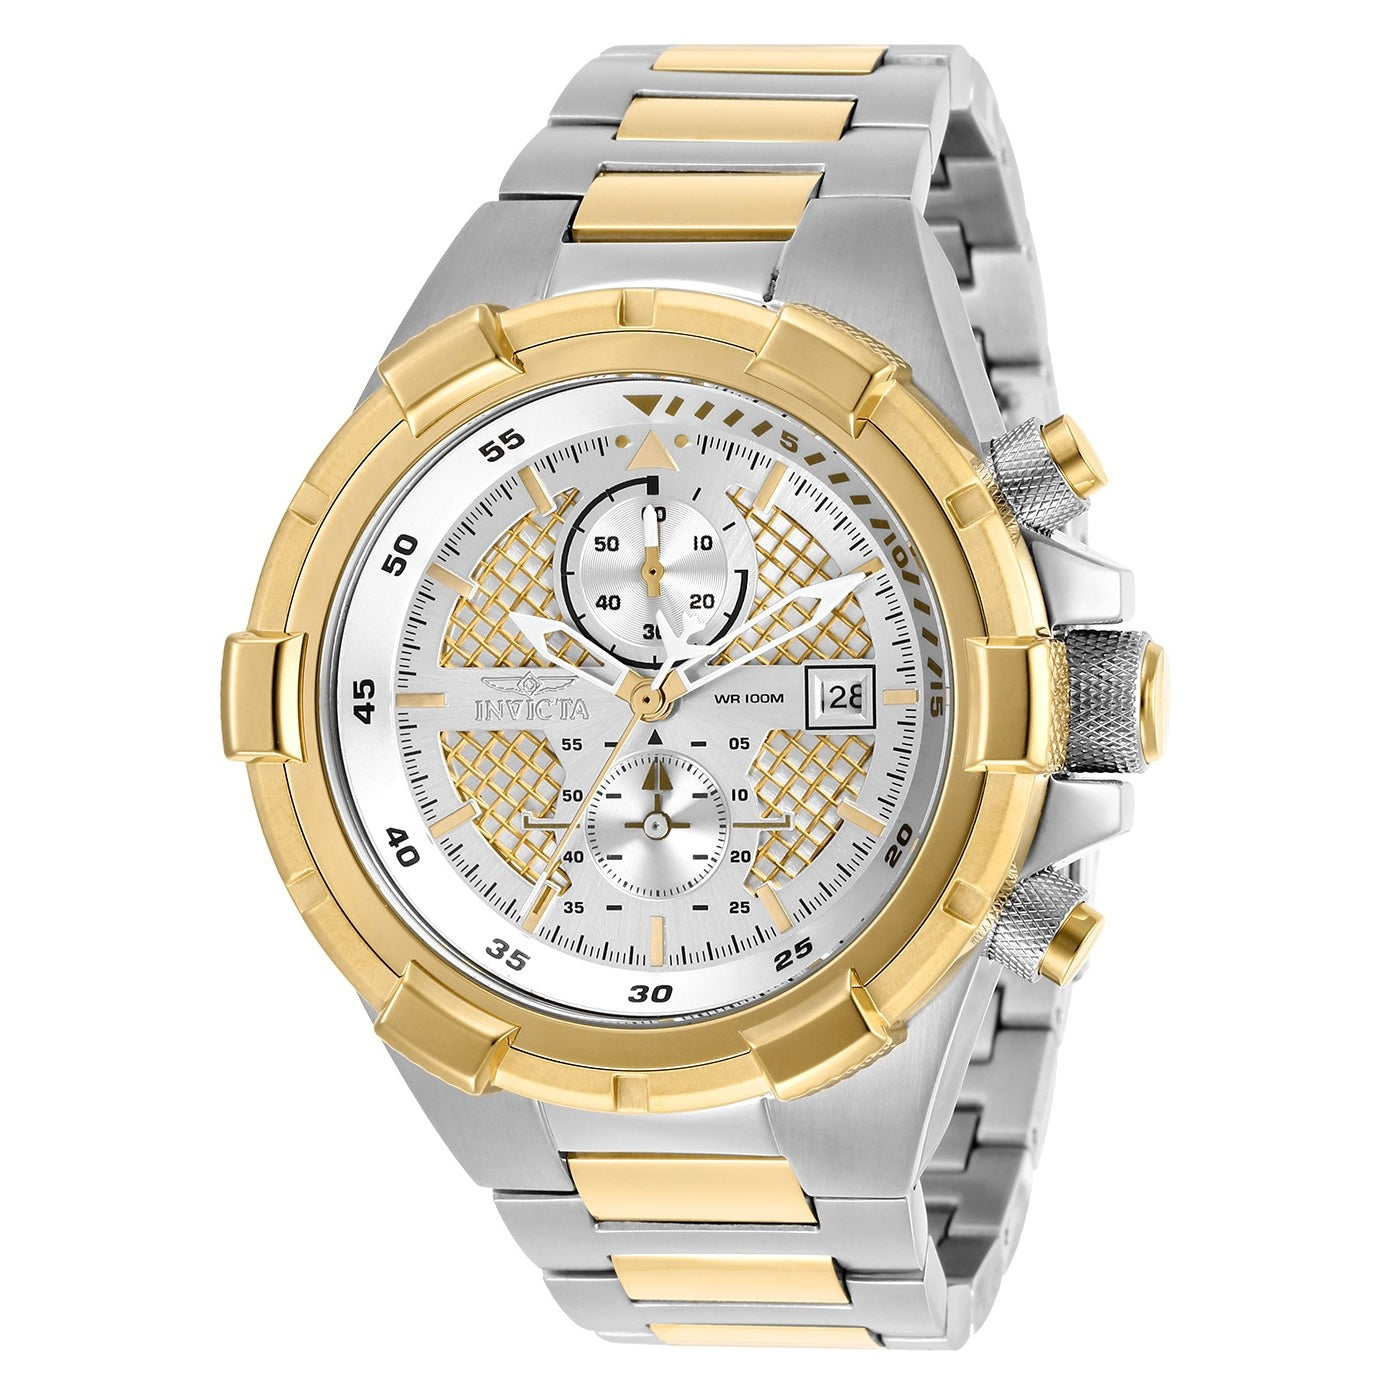 Invicta 28120 Aviator 50.5MM Men's Gold-Tone Stainless Steel Watch ...